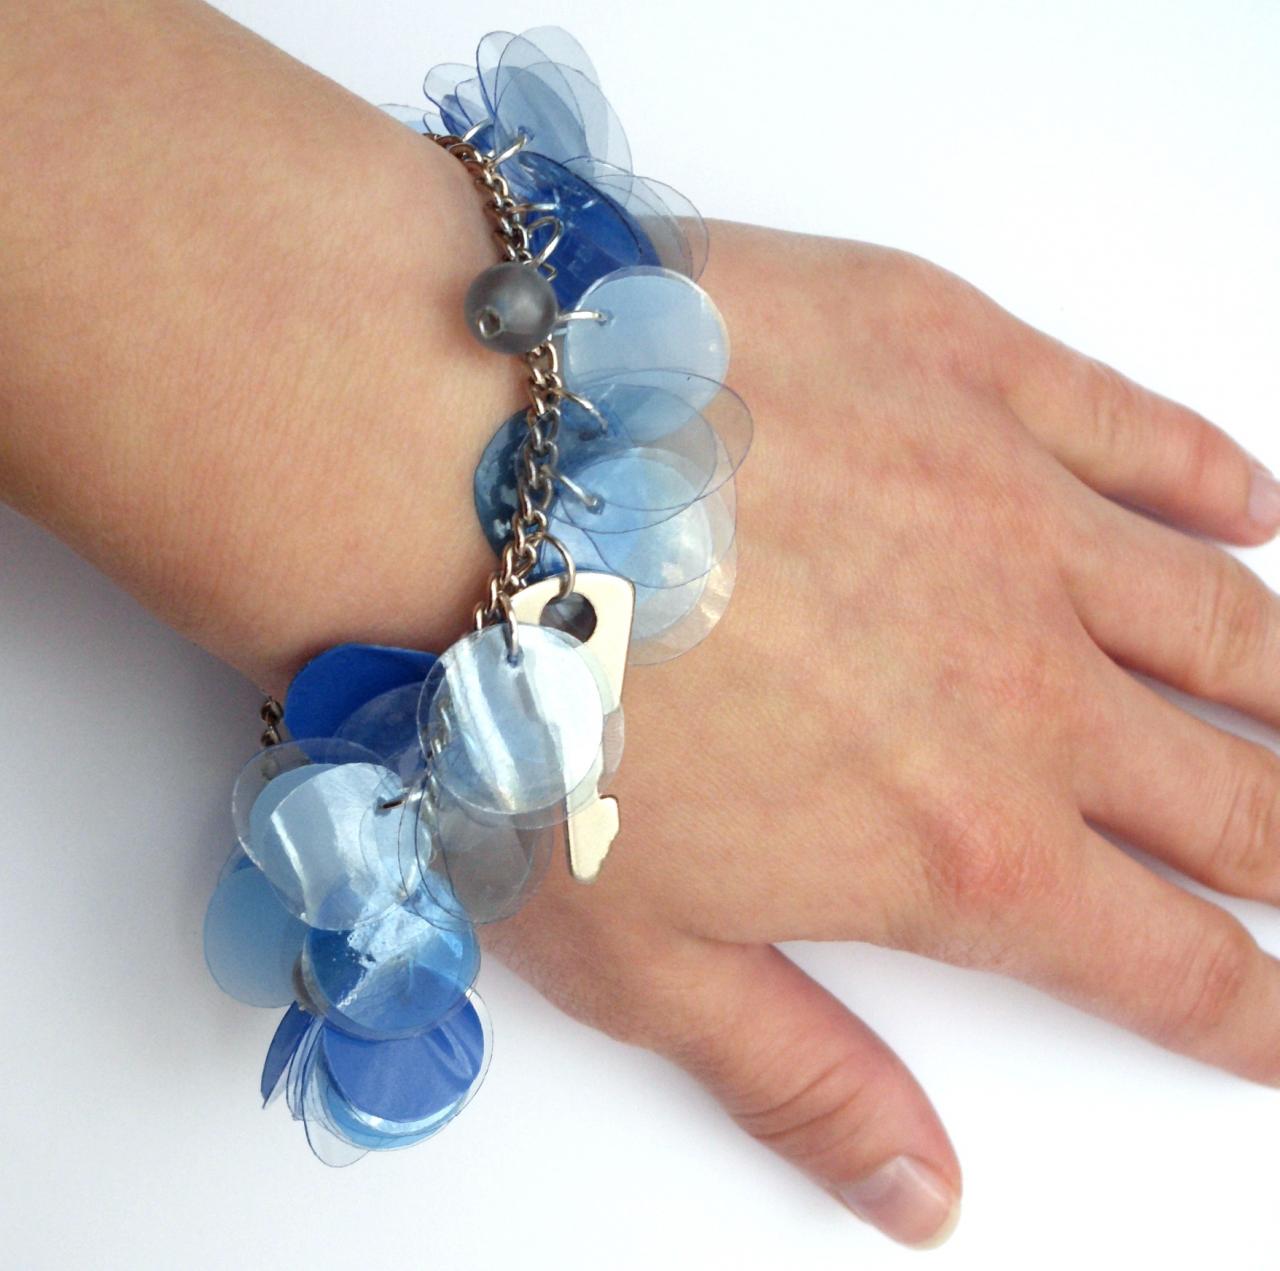 Blue Charm Bracelet Made Of Recycled Plastic Bottles And Blue Beads - Upcycled Jewelry, Eco Friendly, Eco Chic, Boho